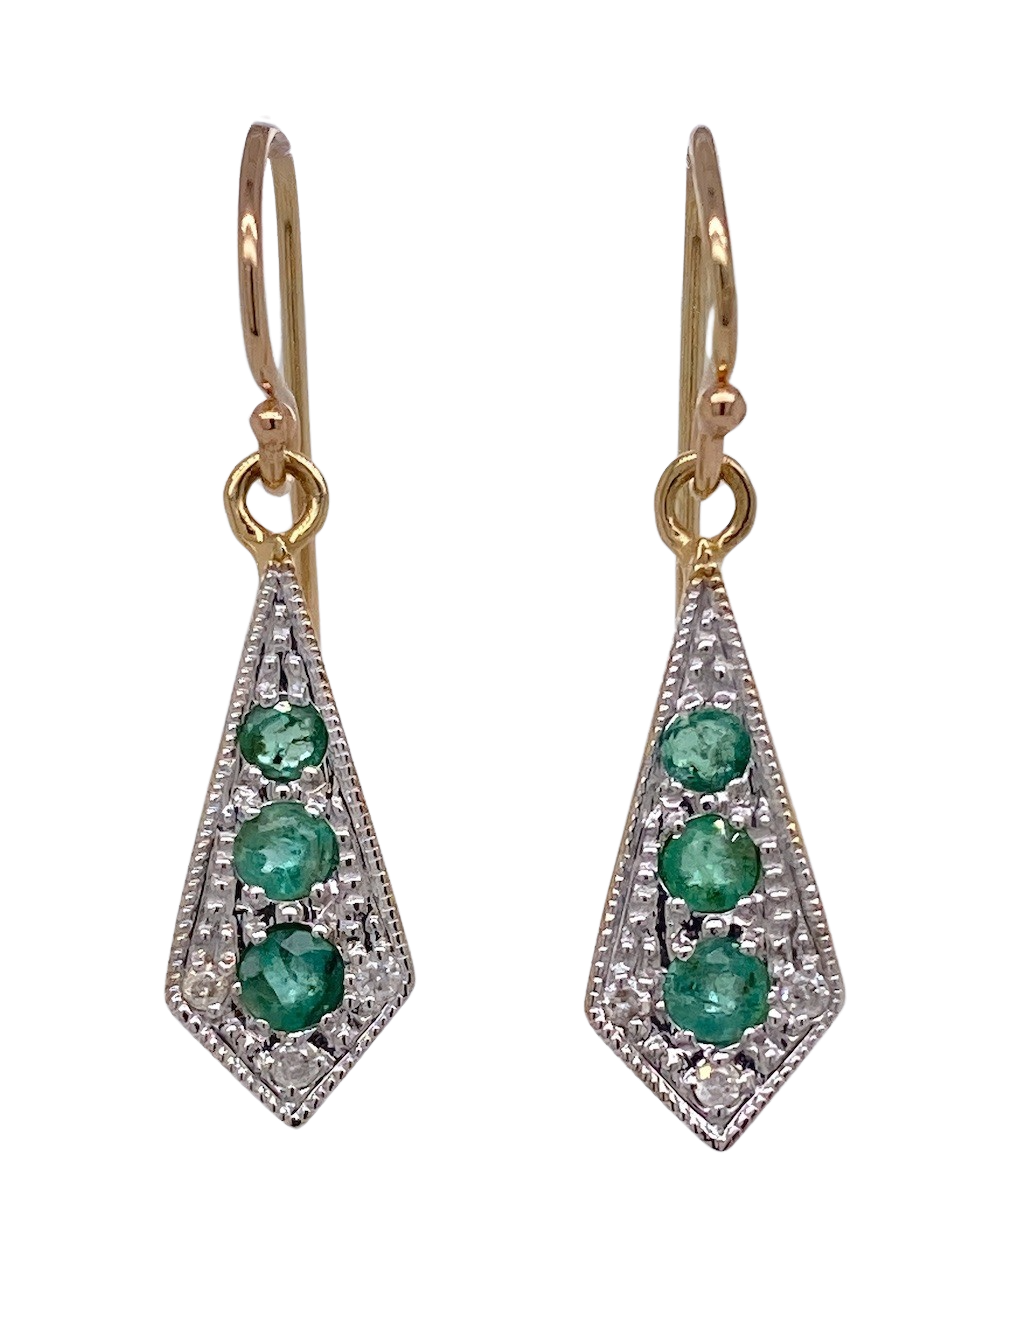 9Ct Yellow Gold Diamond and Emerald Earrings. CH16